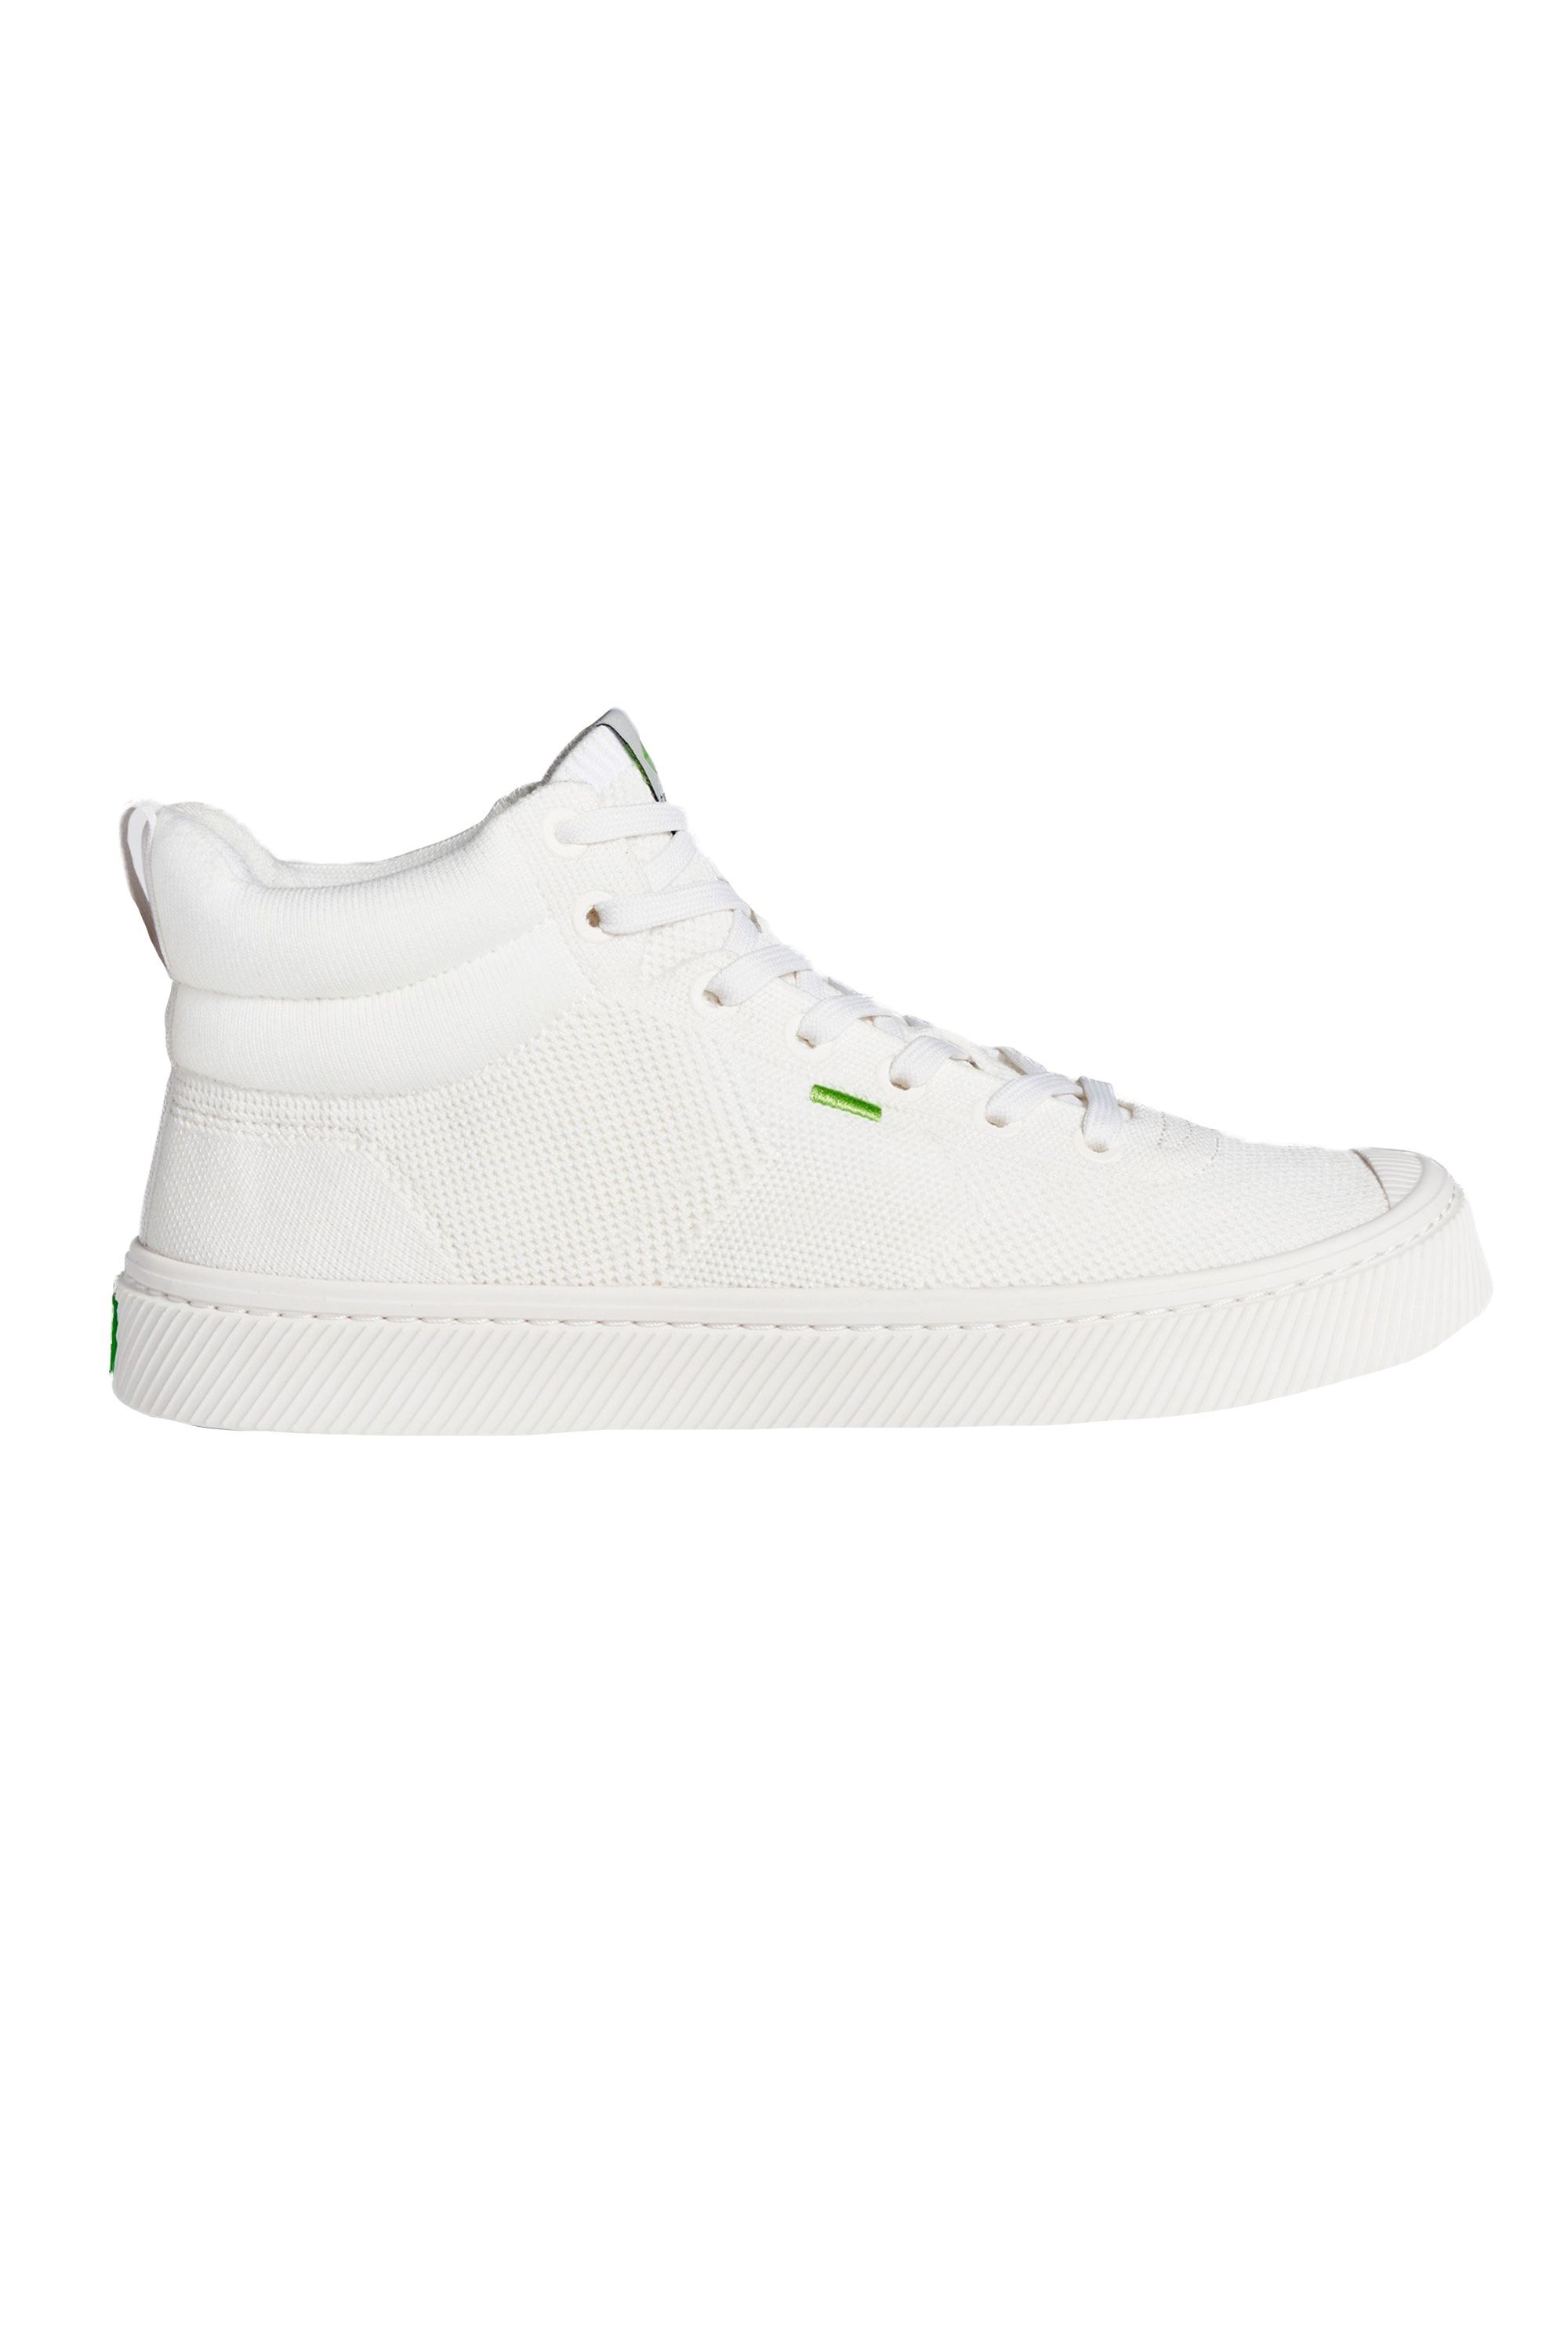 19 Best White Sneakers For 21 Classic White Shoes That Go With Everything